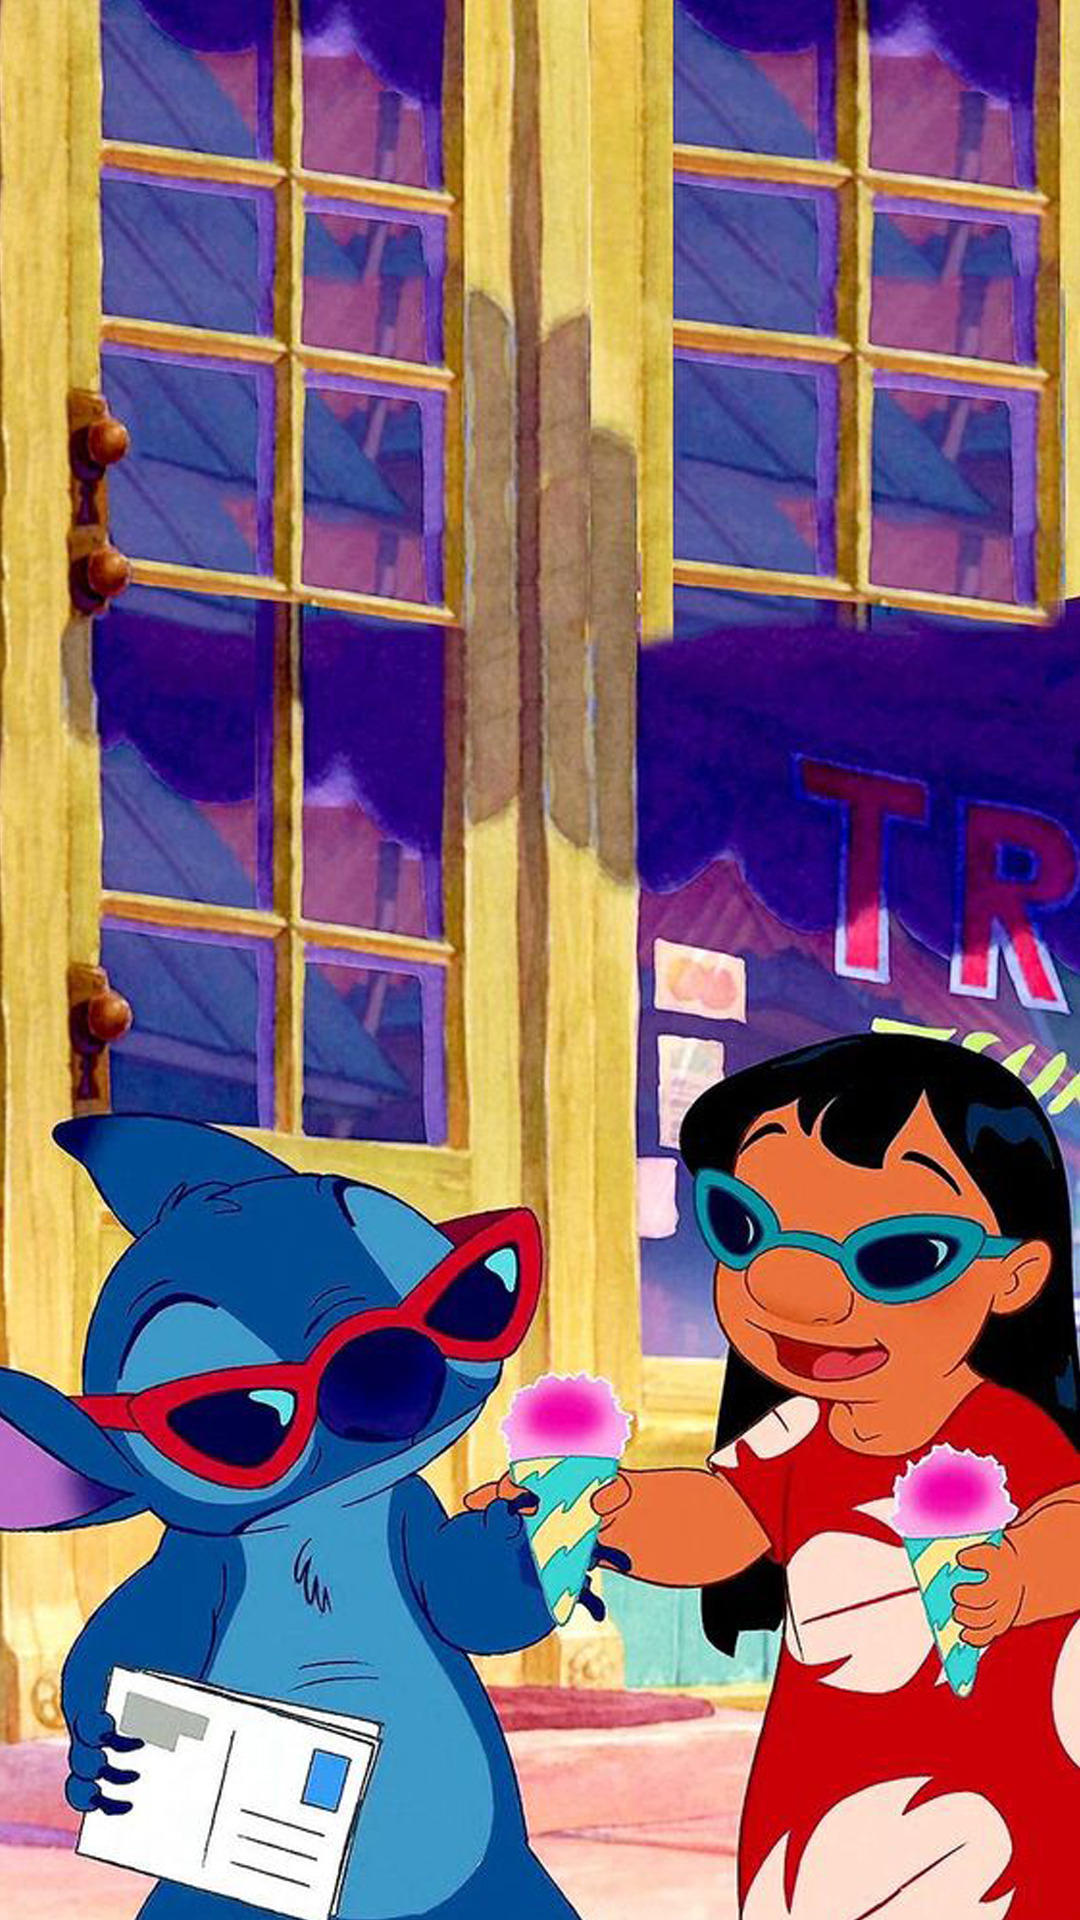 Lilo And Stitch Wallpaper Aesthetic 2943402 Hd Wallpaper Backgrounds Download Find a cute background to download use for free on your phone, desktop, tumblr blog or website. lilo and stitch wallpaper aesthetic